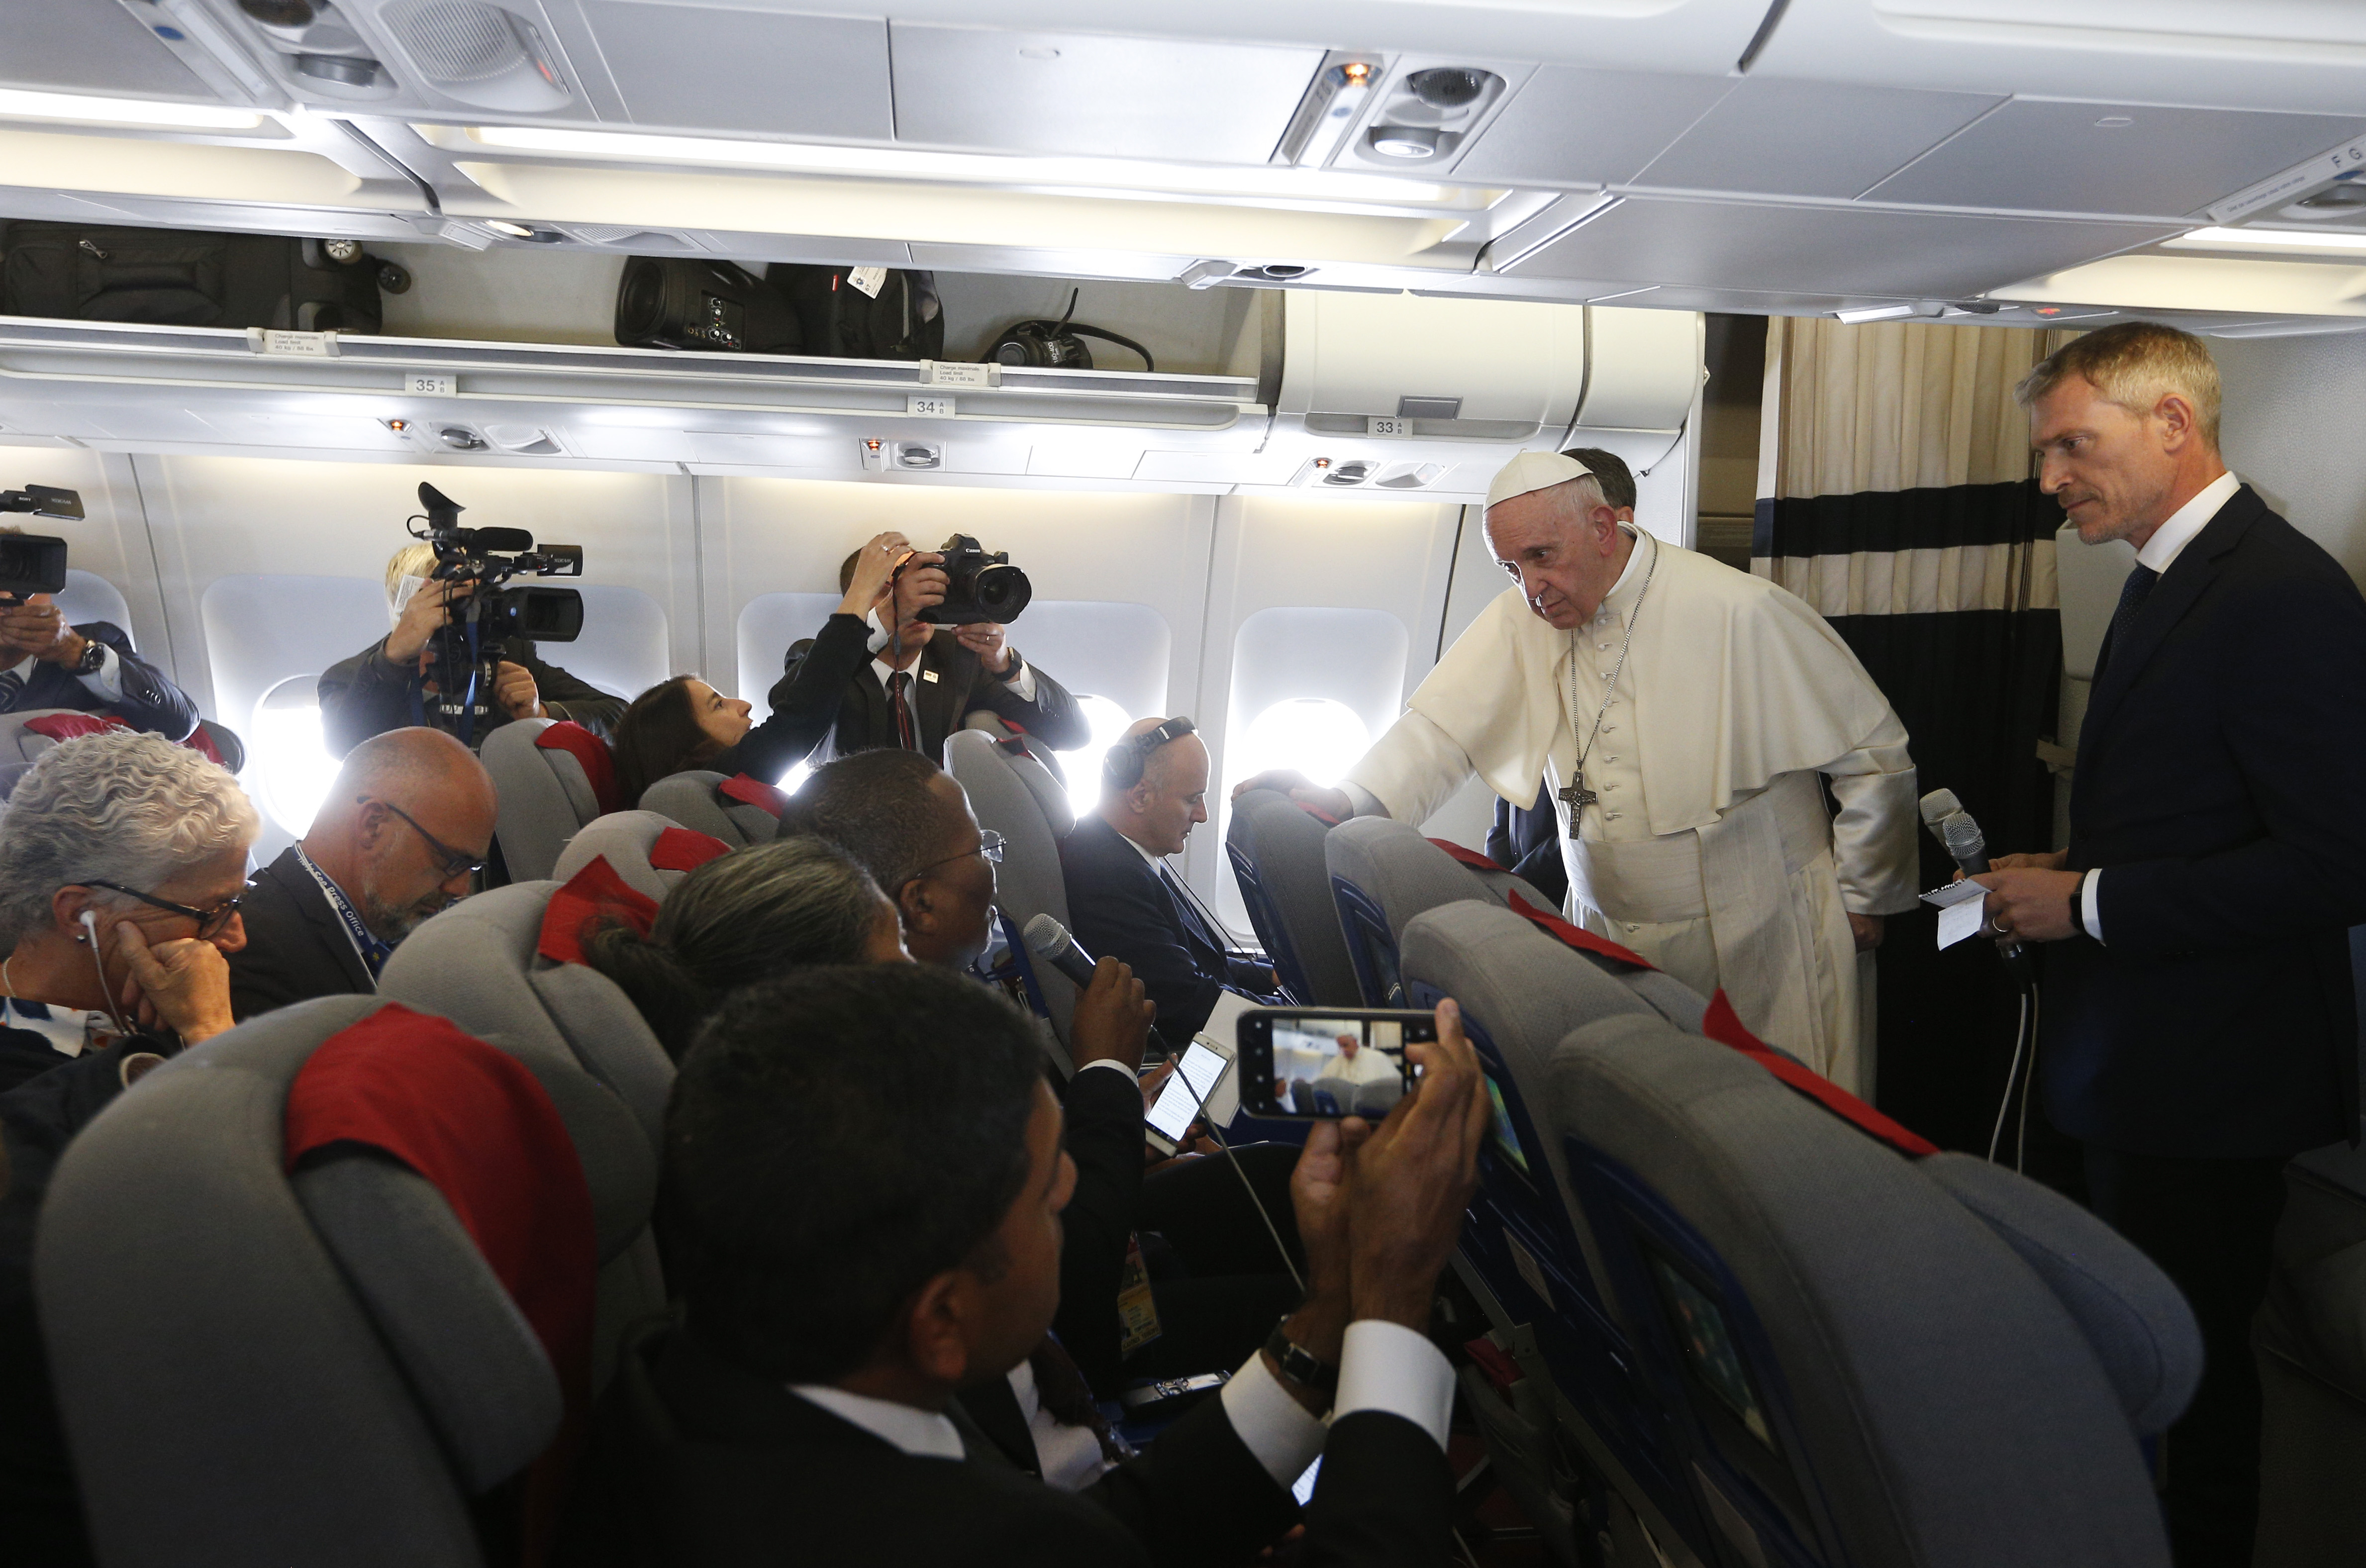 'Just the facts,' pope tells reporters, commenting on news media